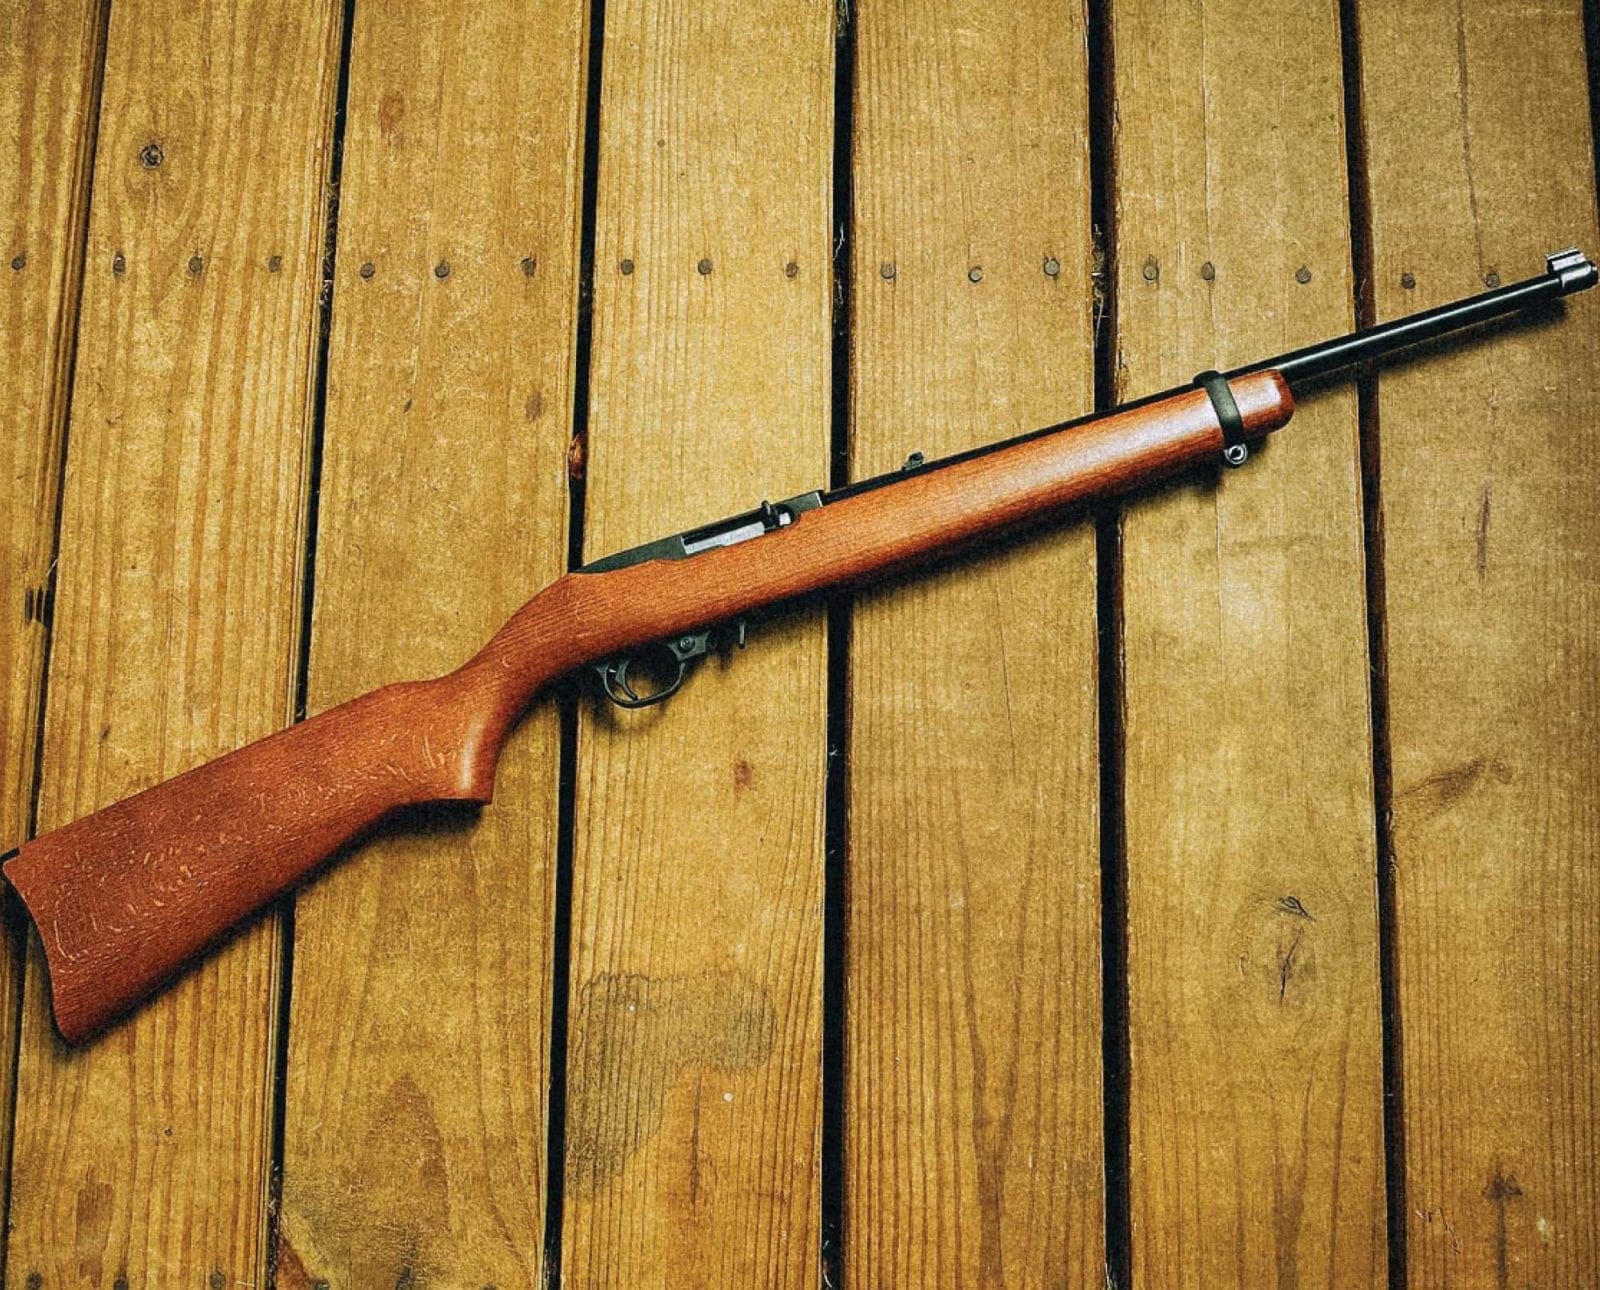 A Ruger 10/22 with woodstock and blued barrels